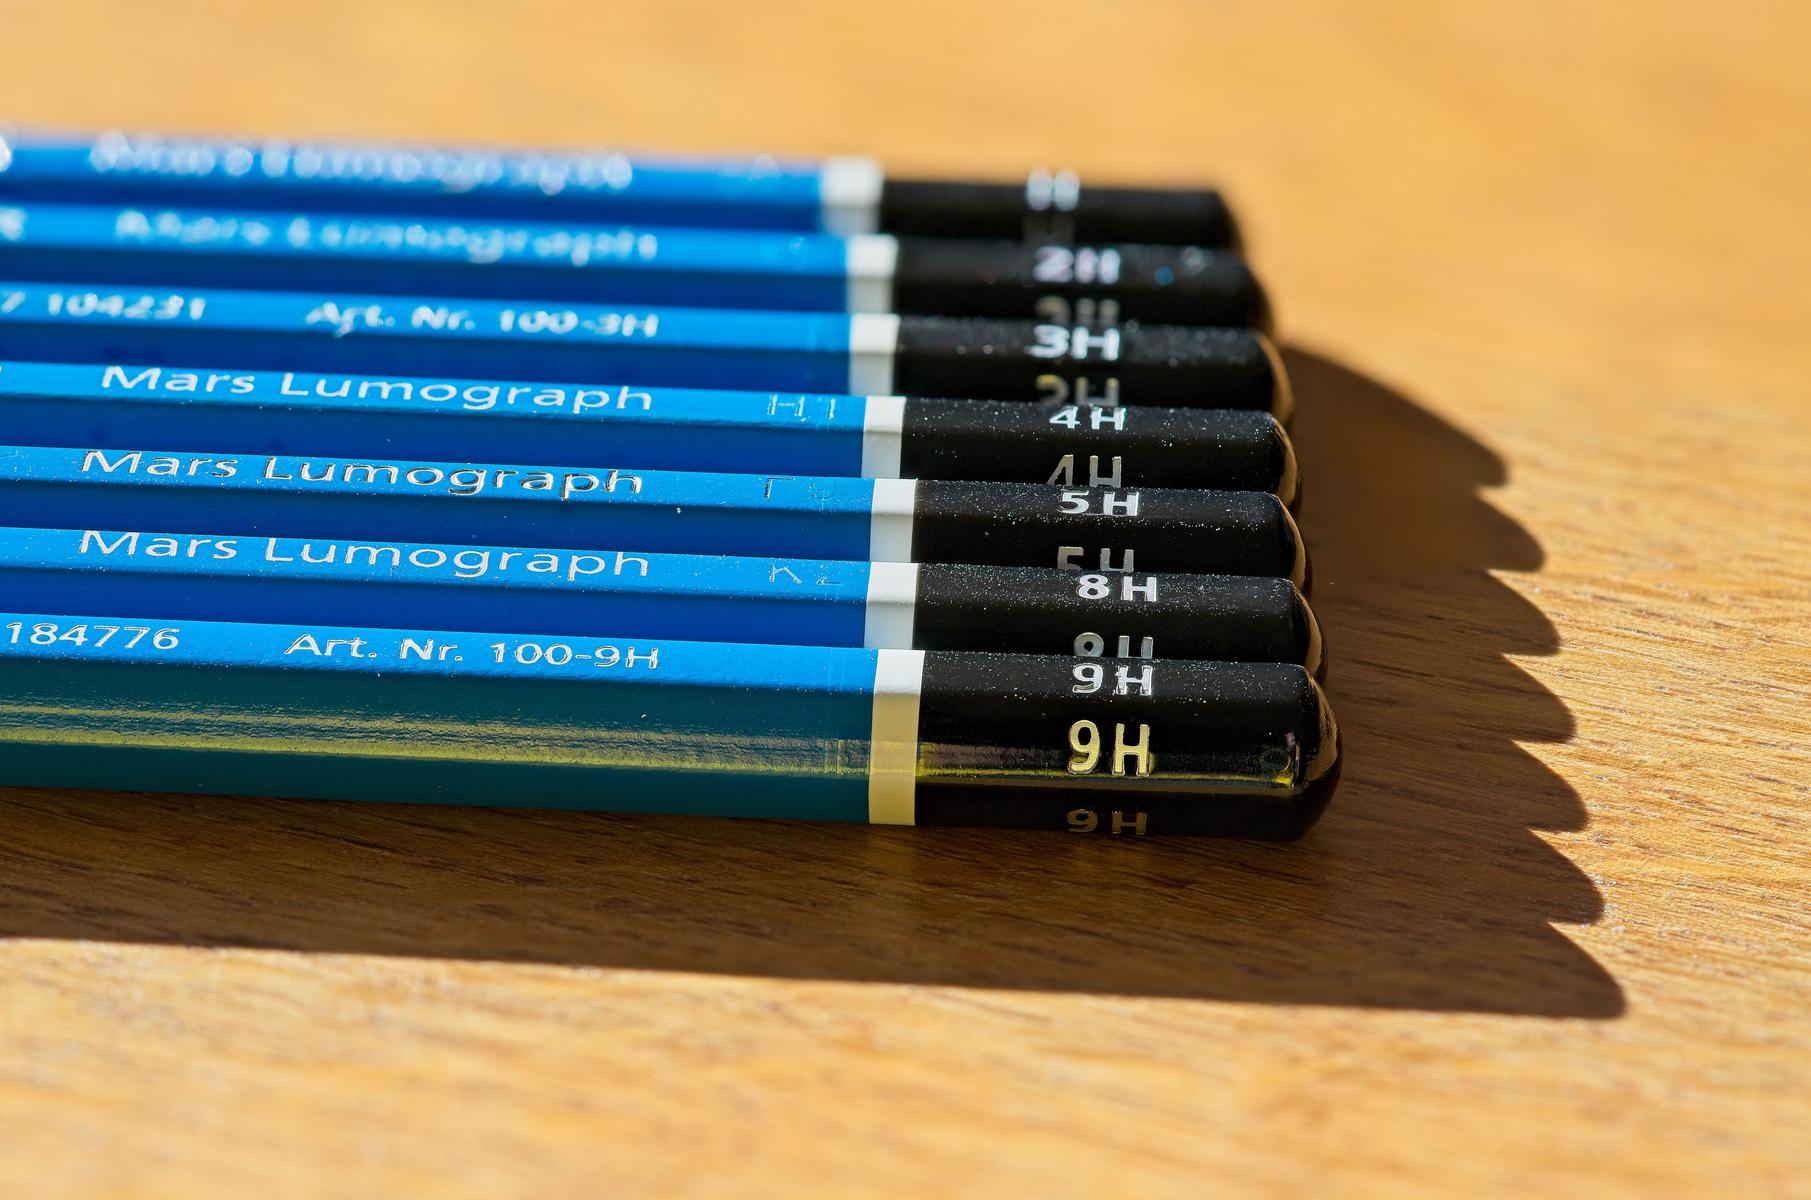 Pencils with pencil hardness from 1H to 9H